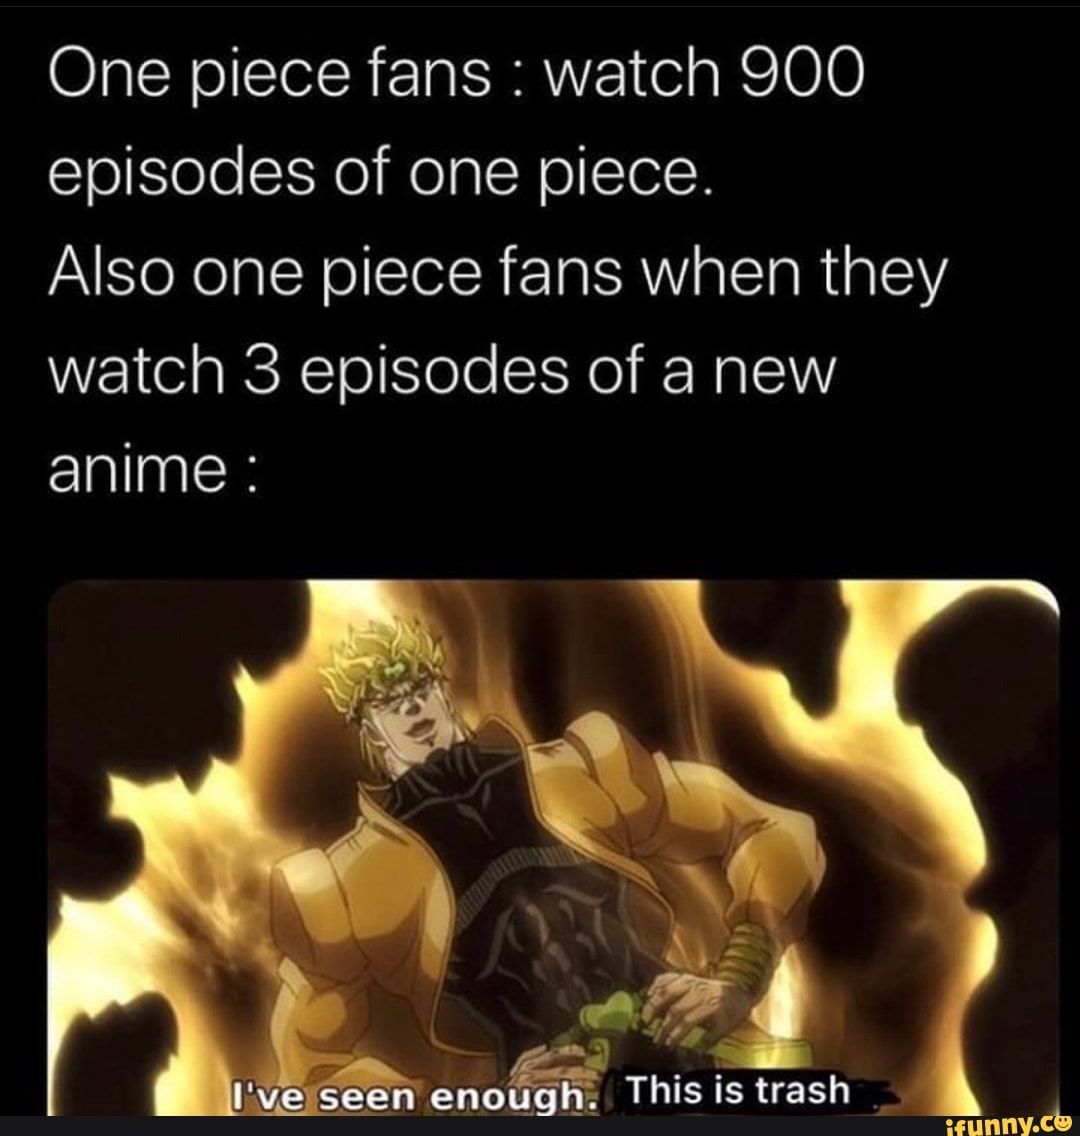 One Piece Fans Watch 900 Episodes Of One Piece Also One Piece Fans When They Watch 3 Episodes Of A New Anime Seen Enough This Is Trash